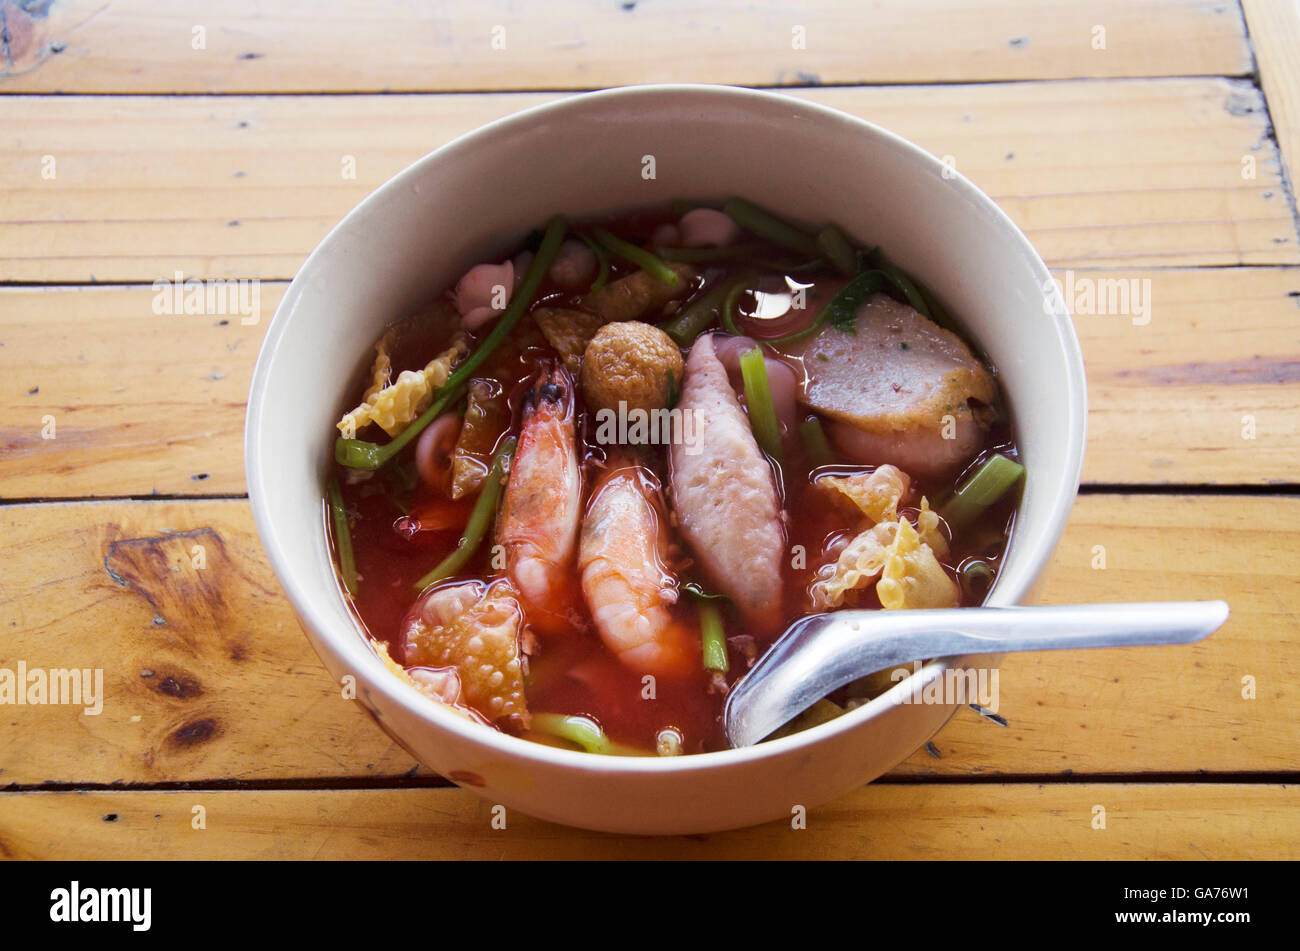 Yong tau foo or Pink seafood flat noodles called yentafo in Thailand Stock Photo